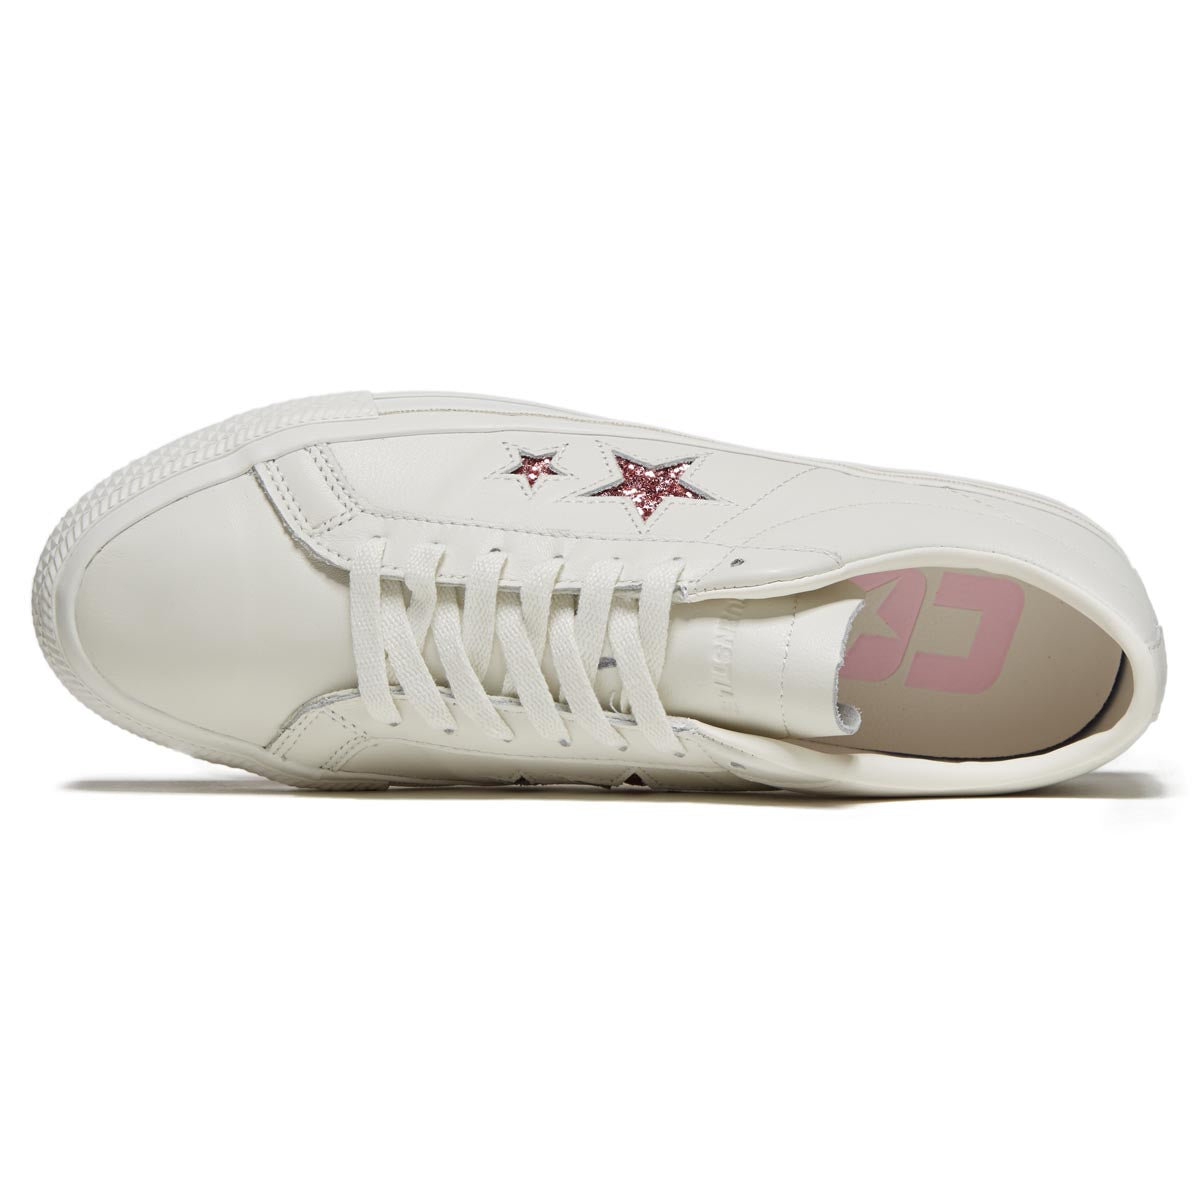 Converse x Turnstile One Star Pro Ox Shoes - White/Pink/White image 4